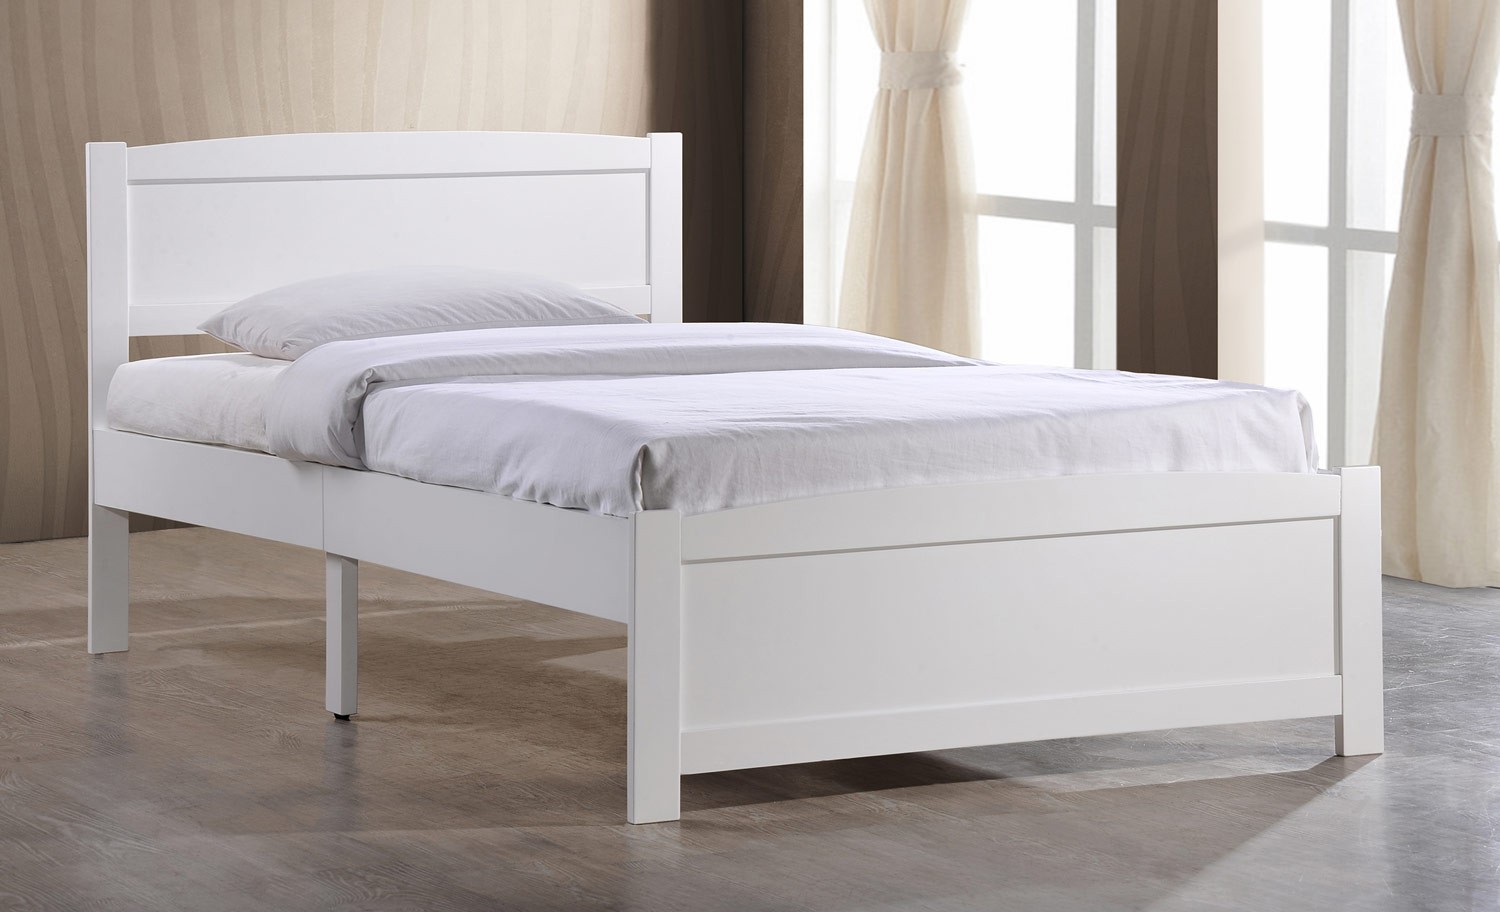 Hillsdale Marcy Twin Bed - White